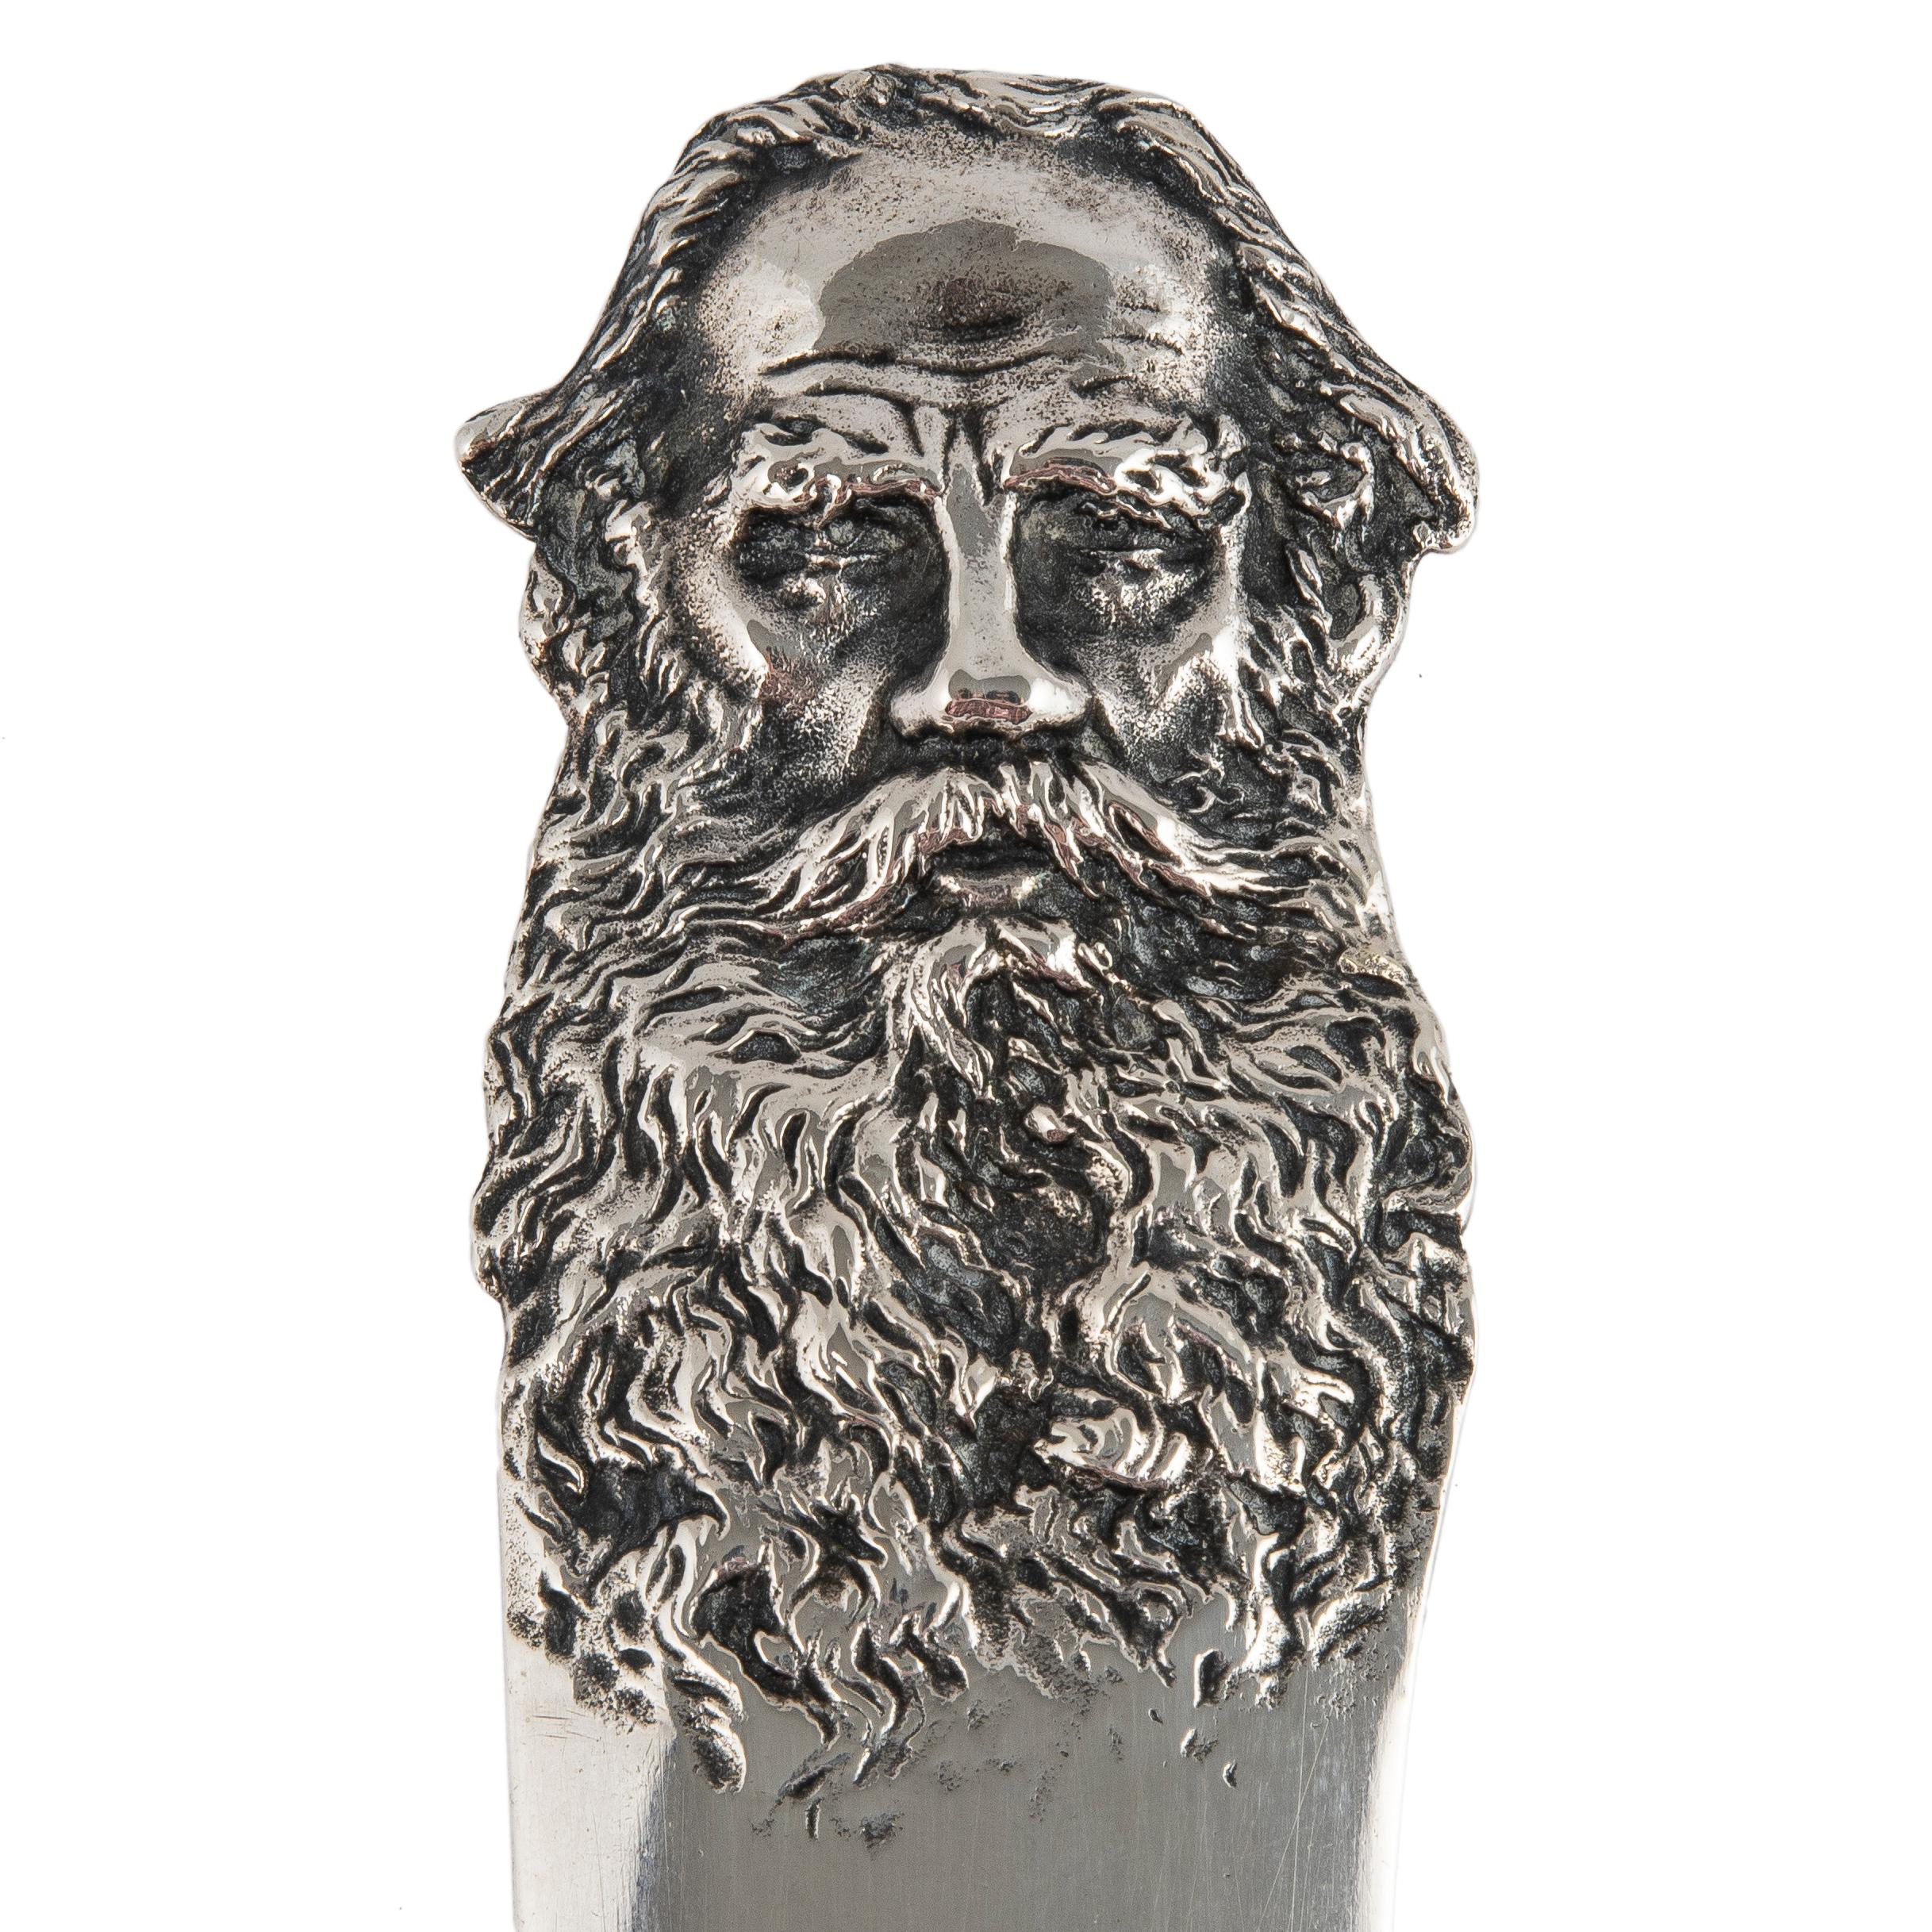 Russian Empire  Russian Imperial-era Silver Tolstoy Novelty Paper Knife by Khlebnikov, 1910